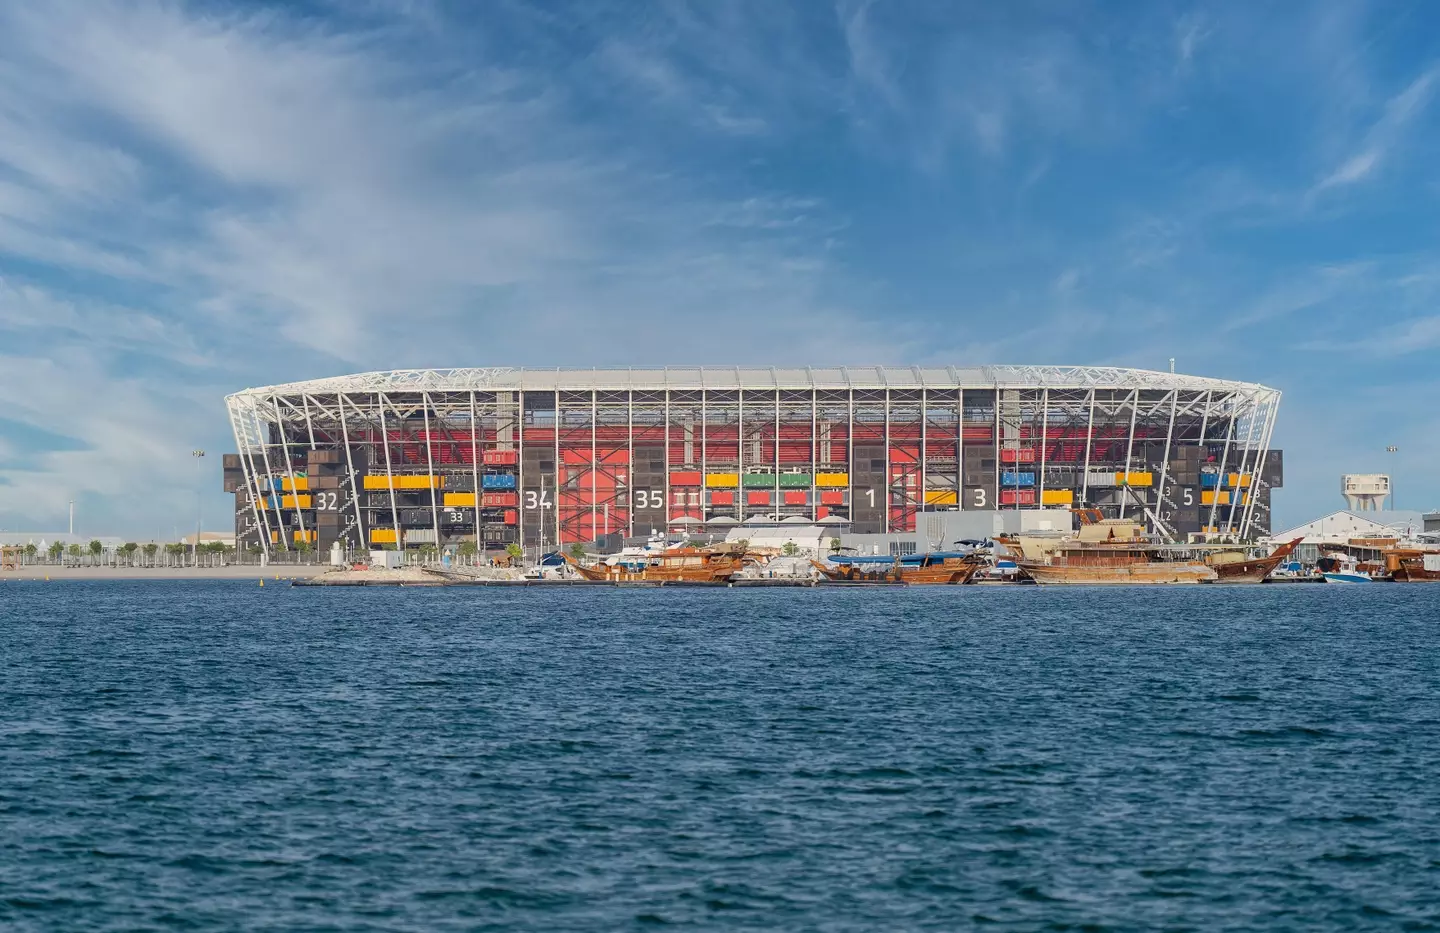 Stadium 974 will be fully dismantled after the World Cup.